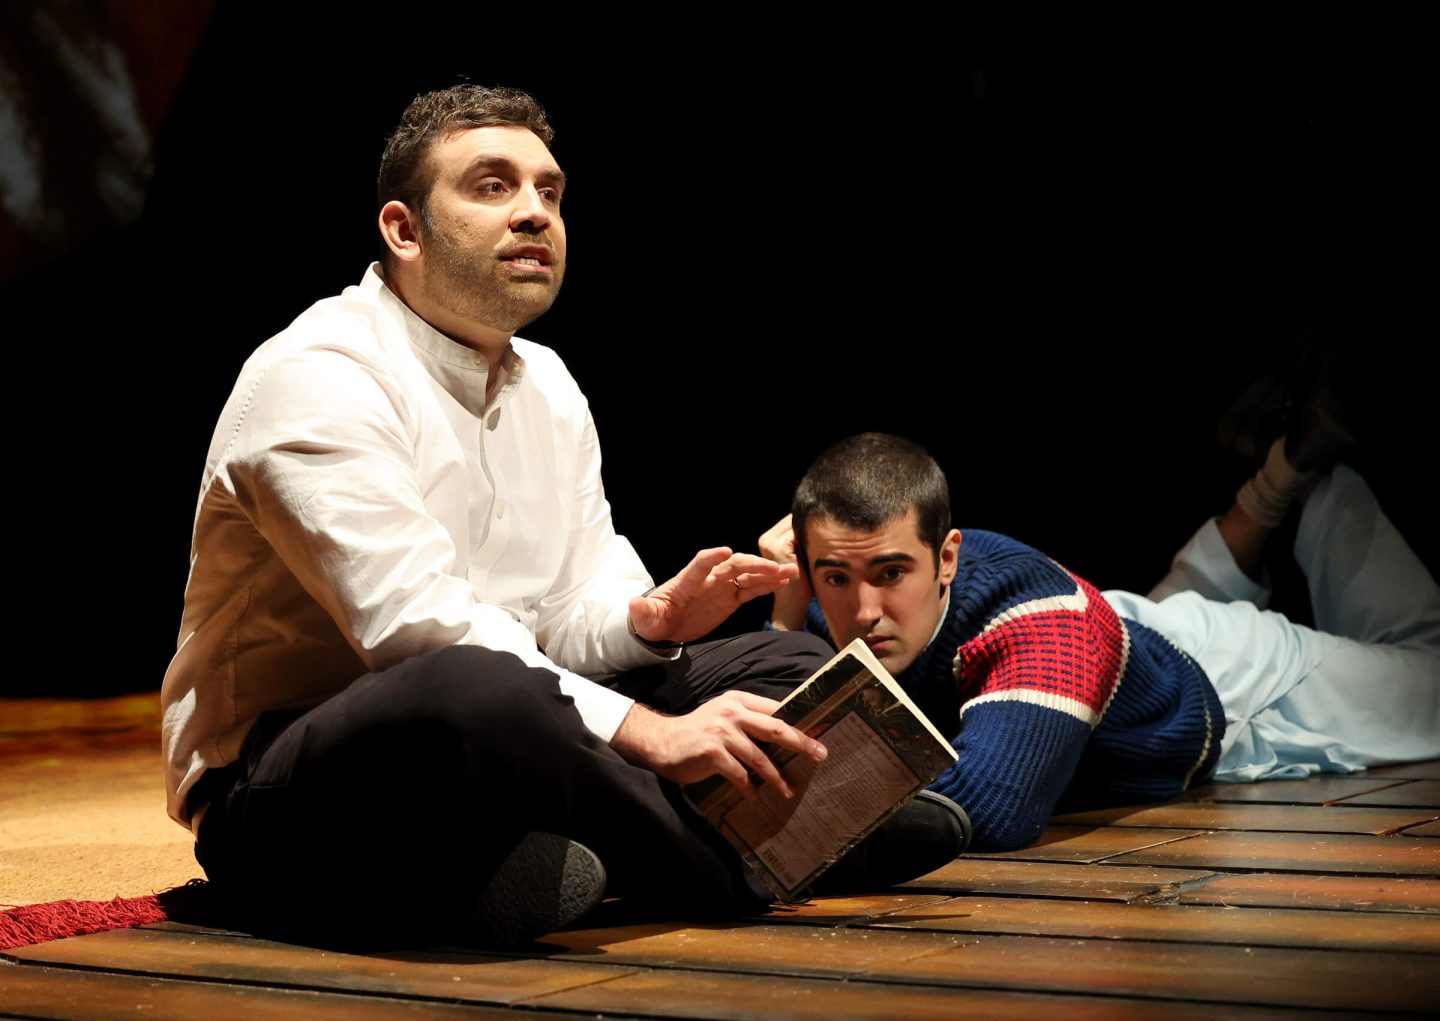 Two cast members from the Kite runner on stage at Malvern Theatres with one holding a book and the other reaching for it